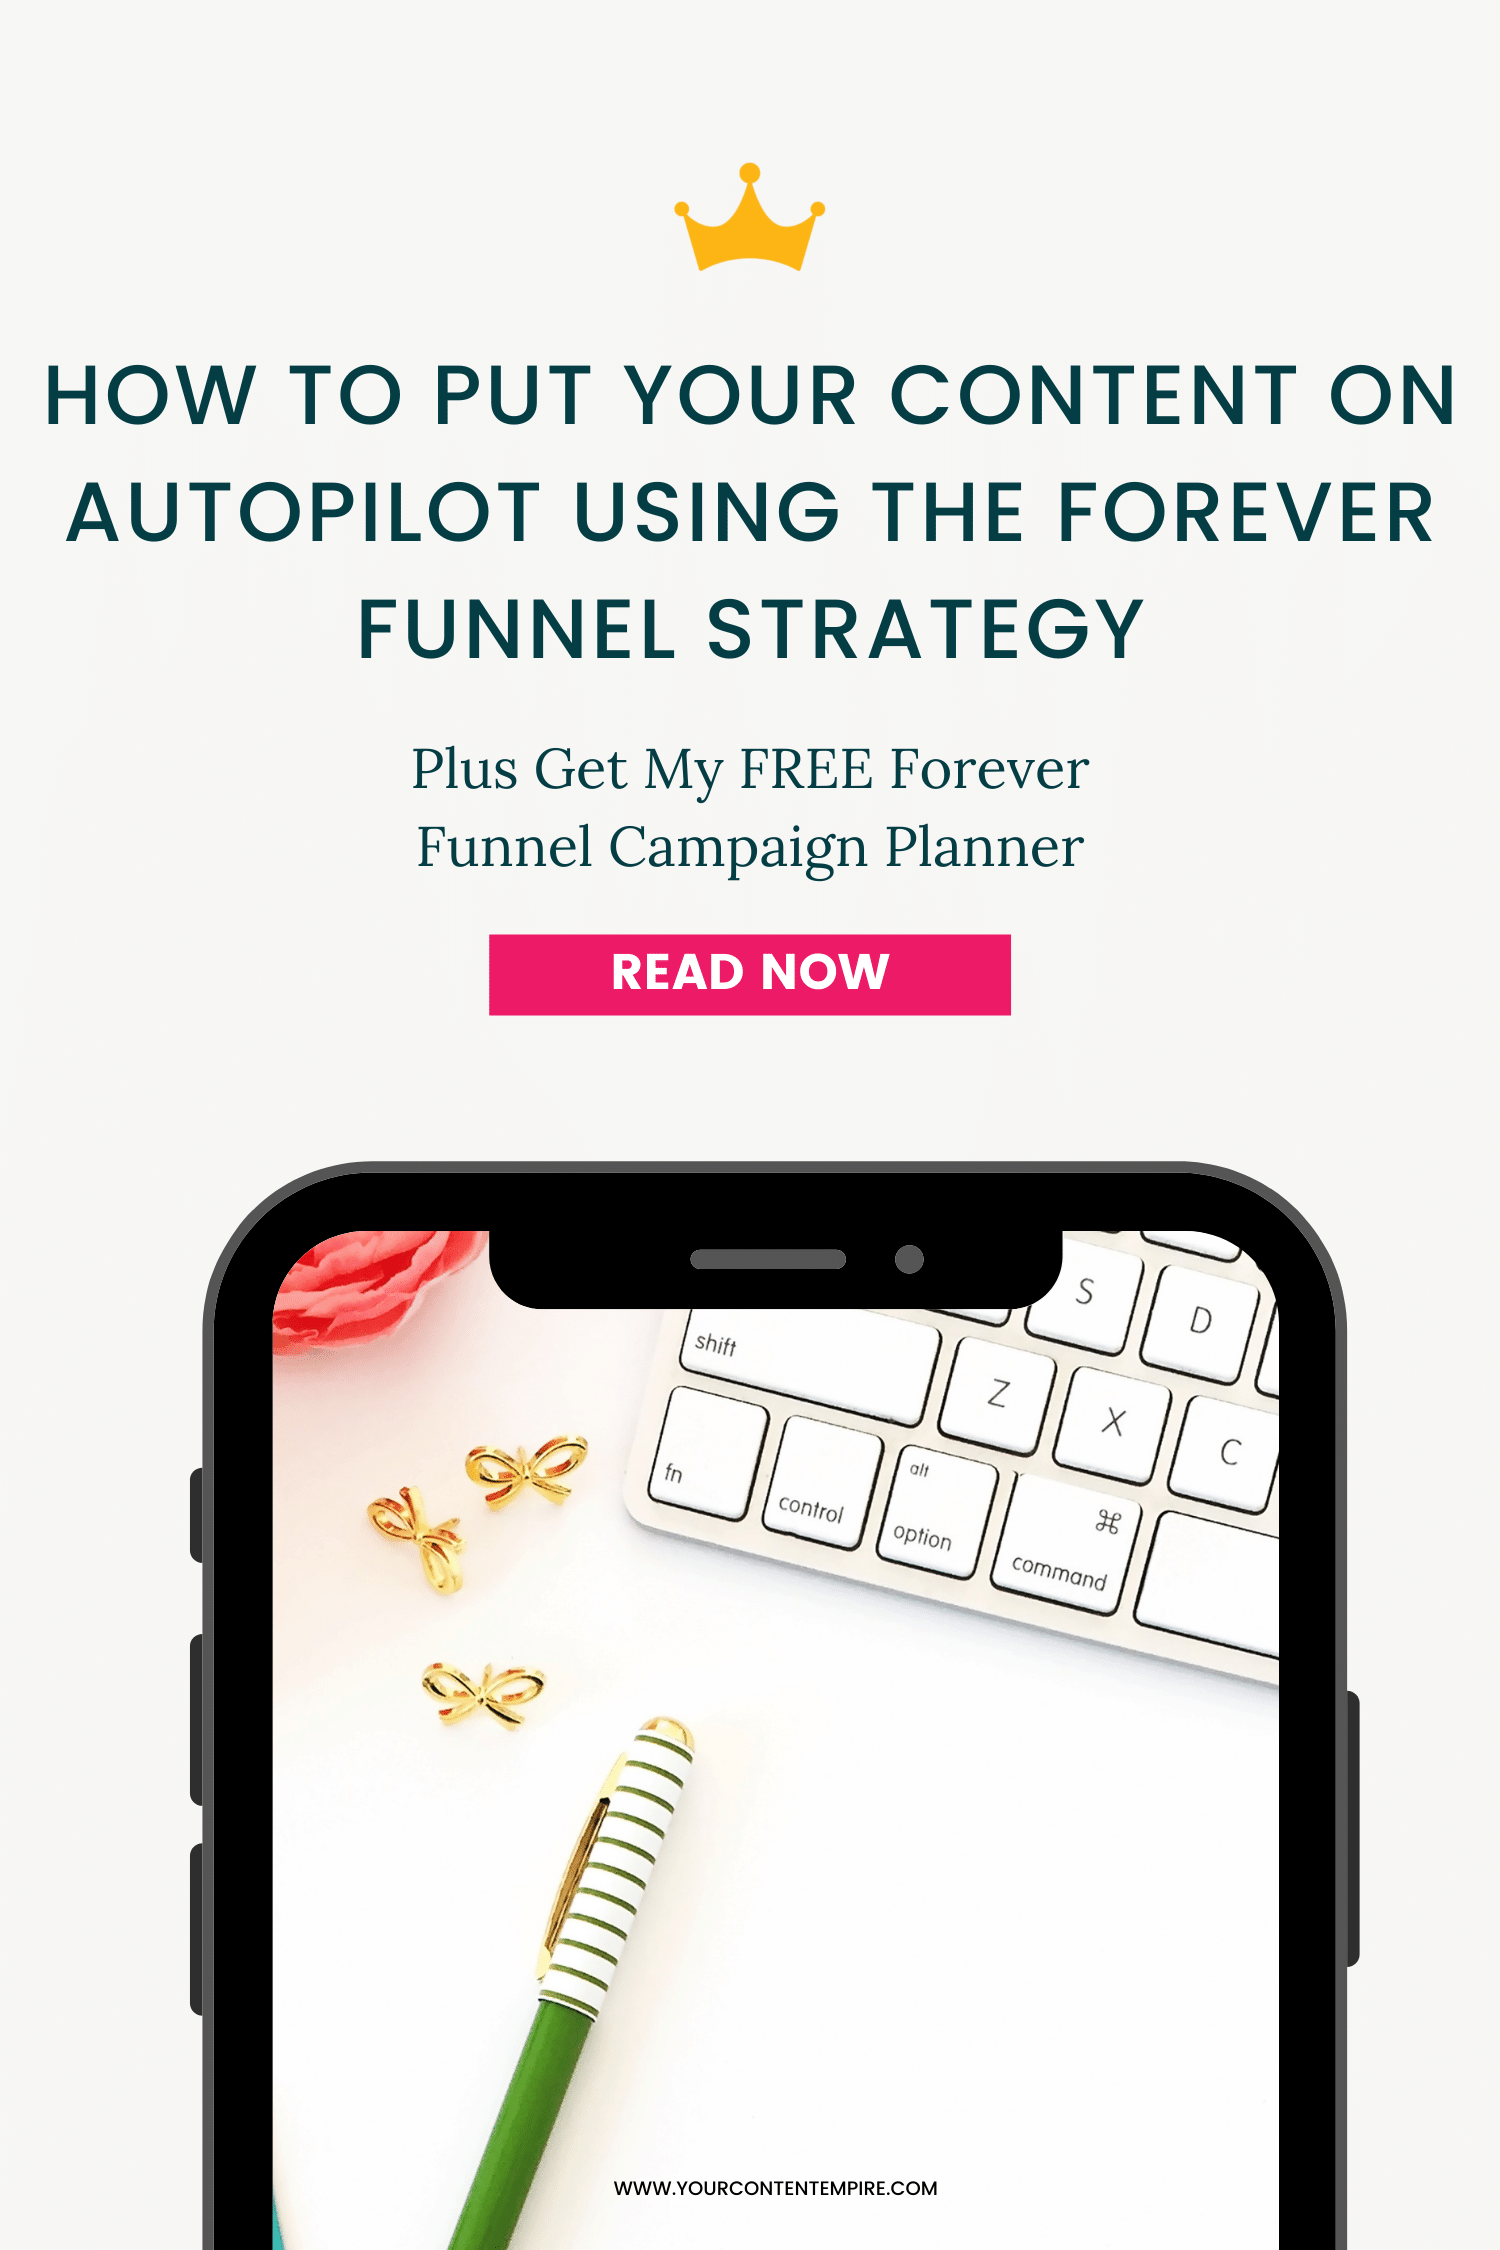 How to Put Your Content on Autopilot Using the Forever Funnel Strategy